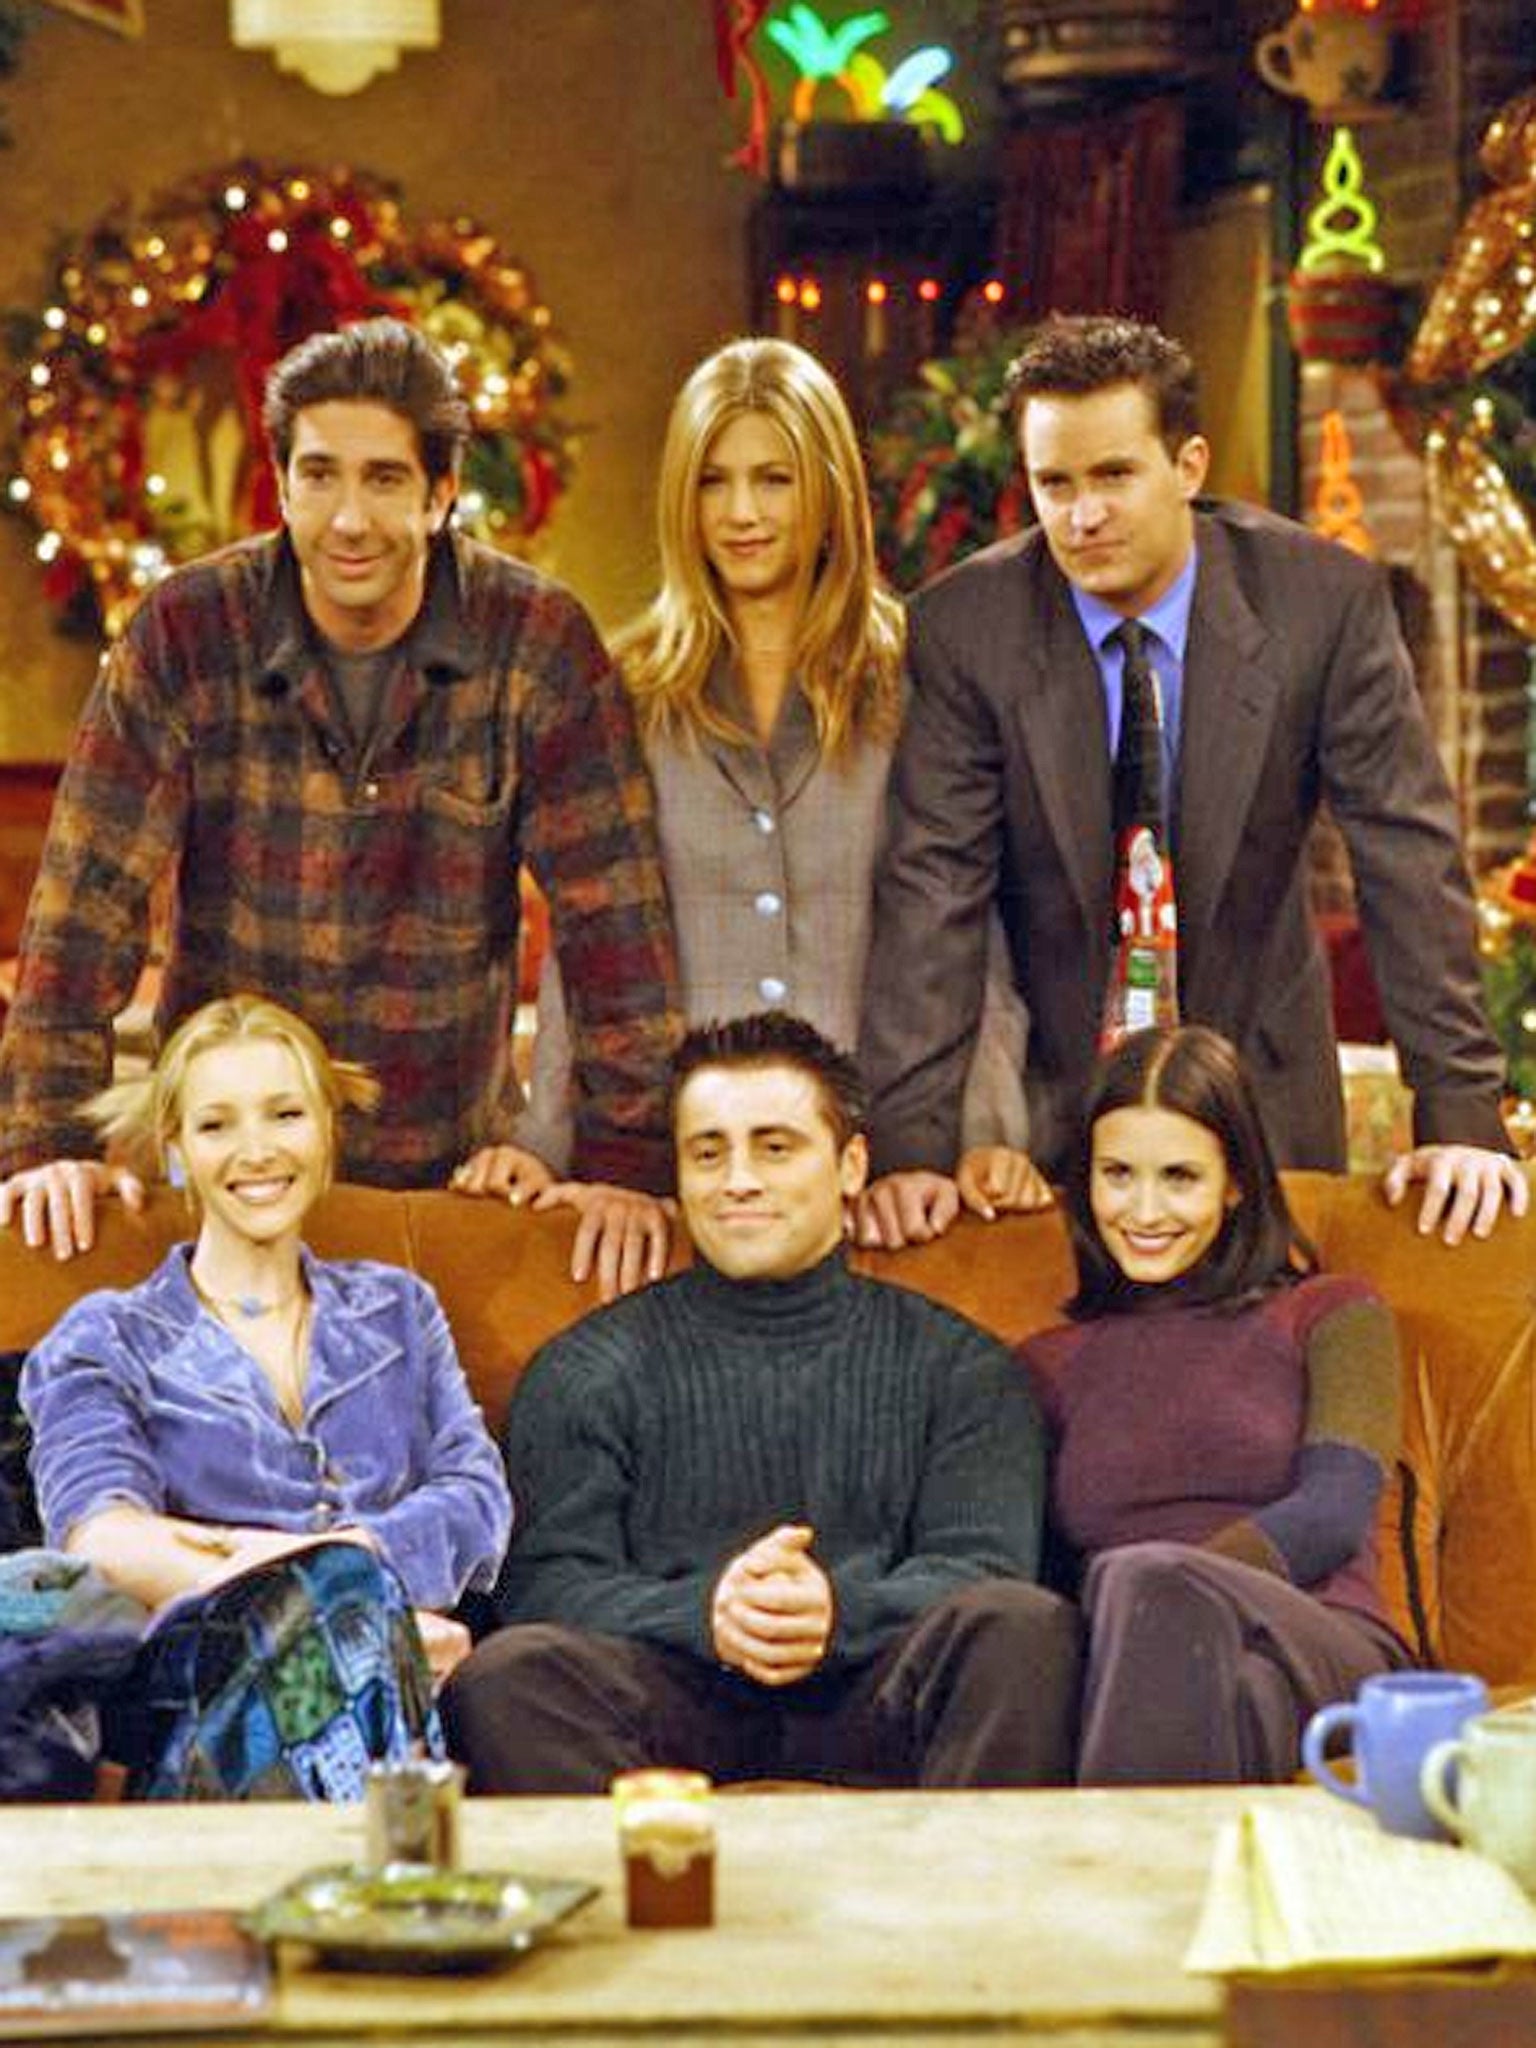 Friends is approaching its 20th anniversary and its popularity continues to grow